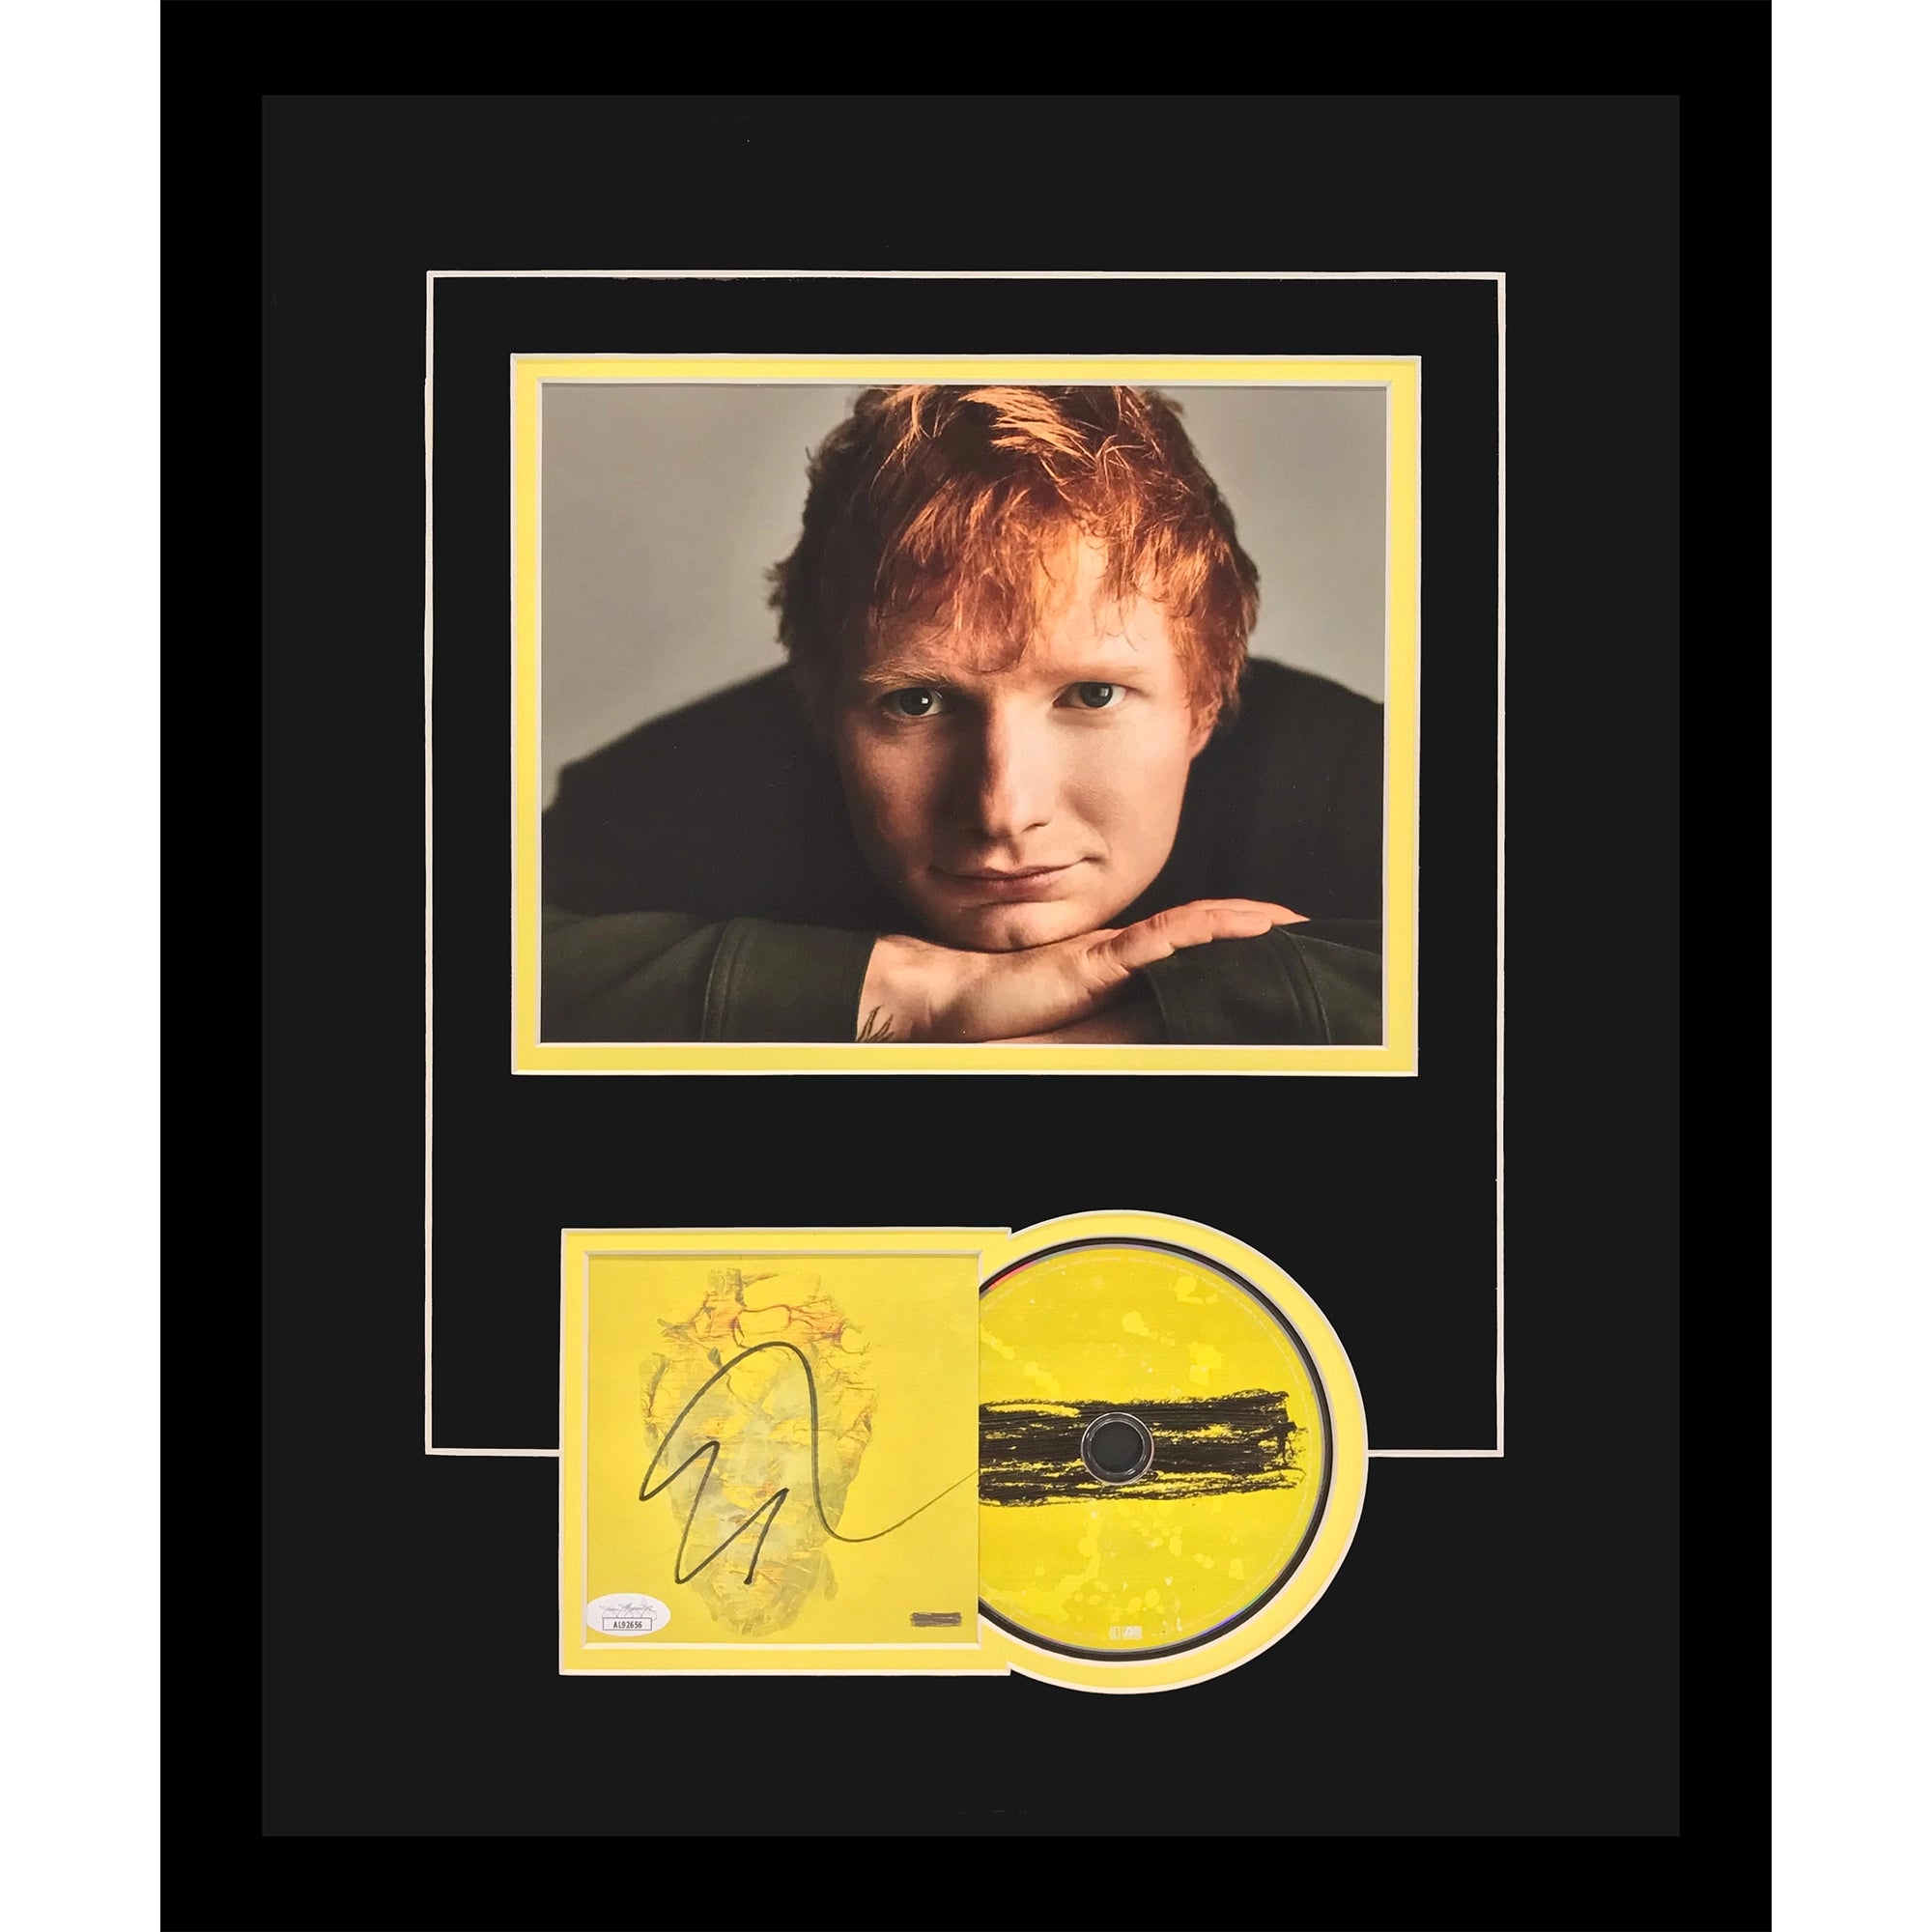 Ed Sheeran Autographed Subtract Deluxe Framed CD and Cover - JSA